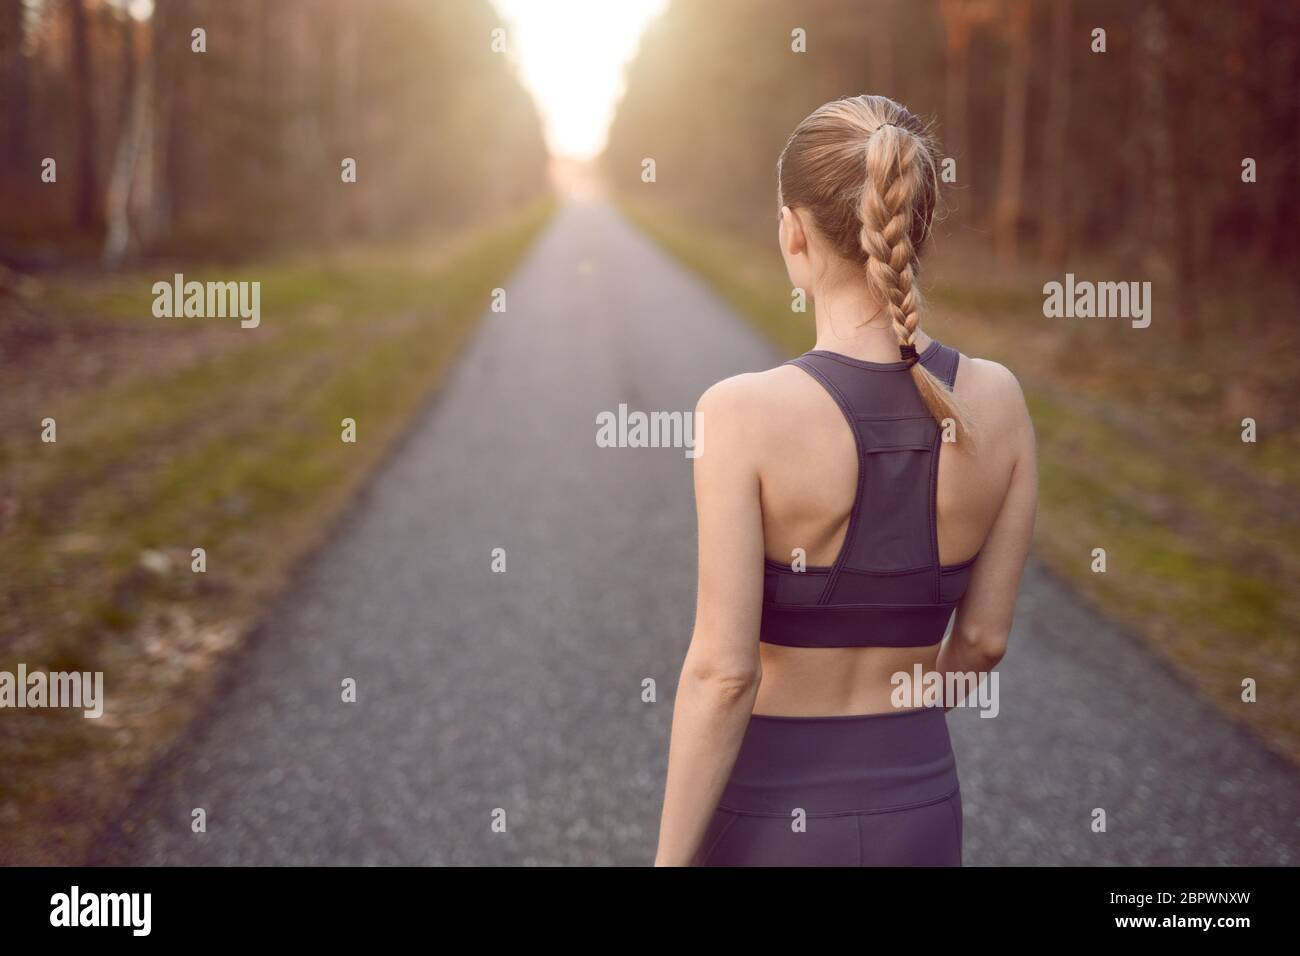 Sporty healthy young woman walking at sunrise along a rural road through a dense forest towards the glow of the sun at the end between the trees in a Stock Photo